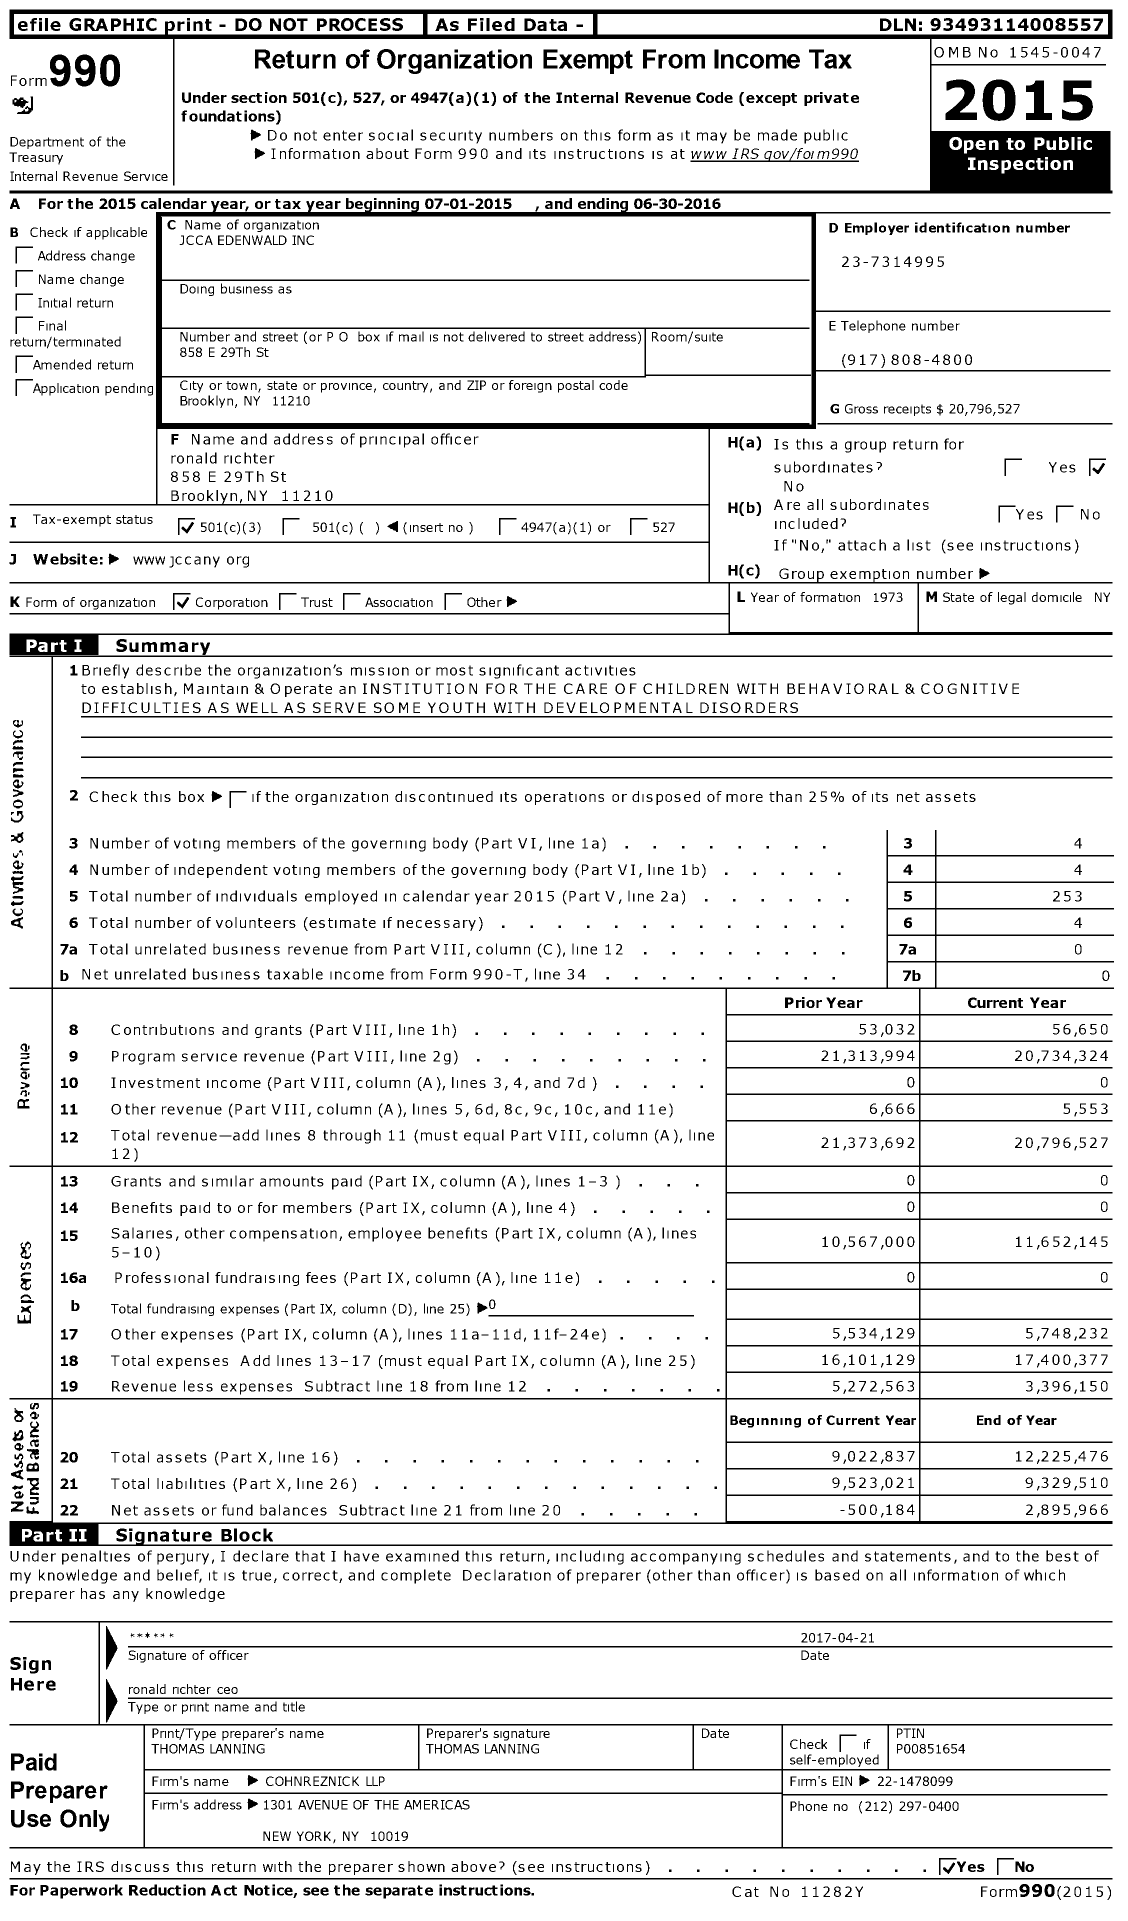 Image of first page of 2015 Form 990 for Jcca Edenwald